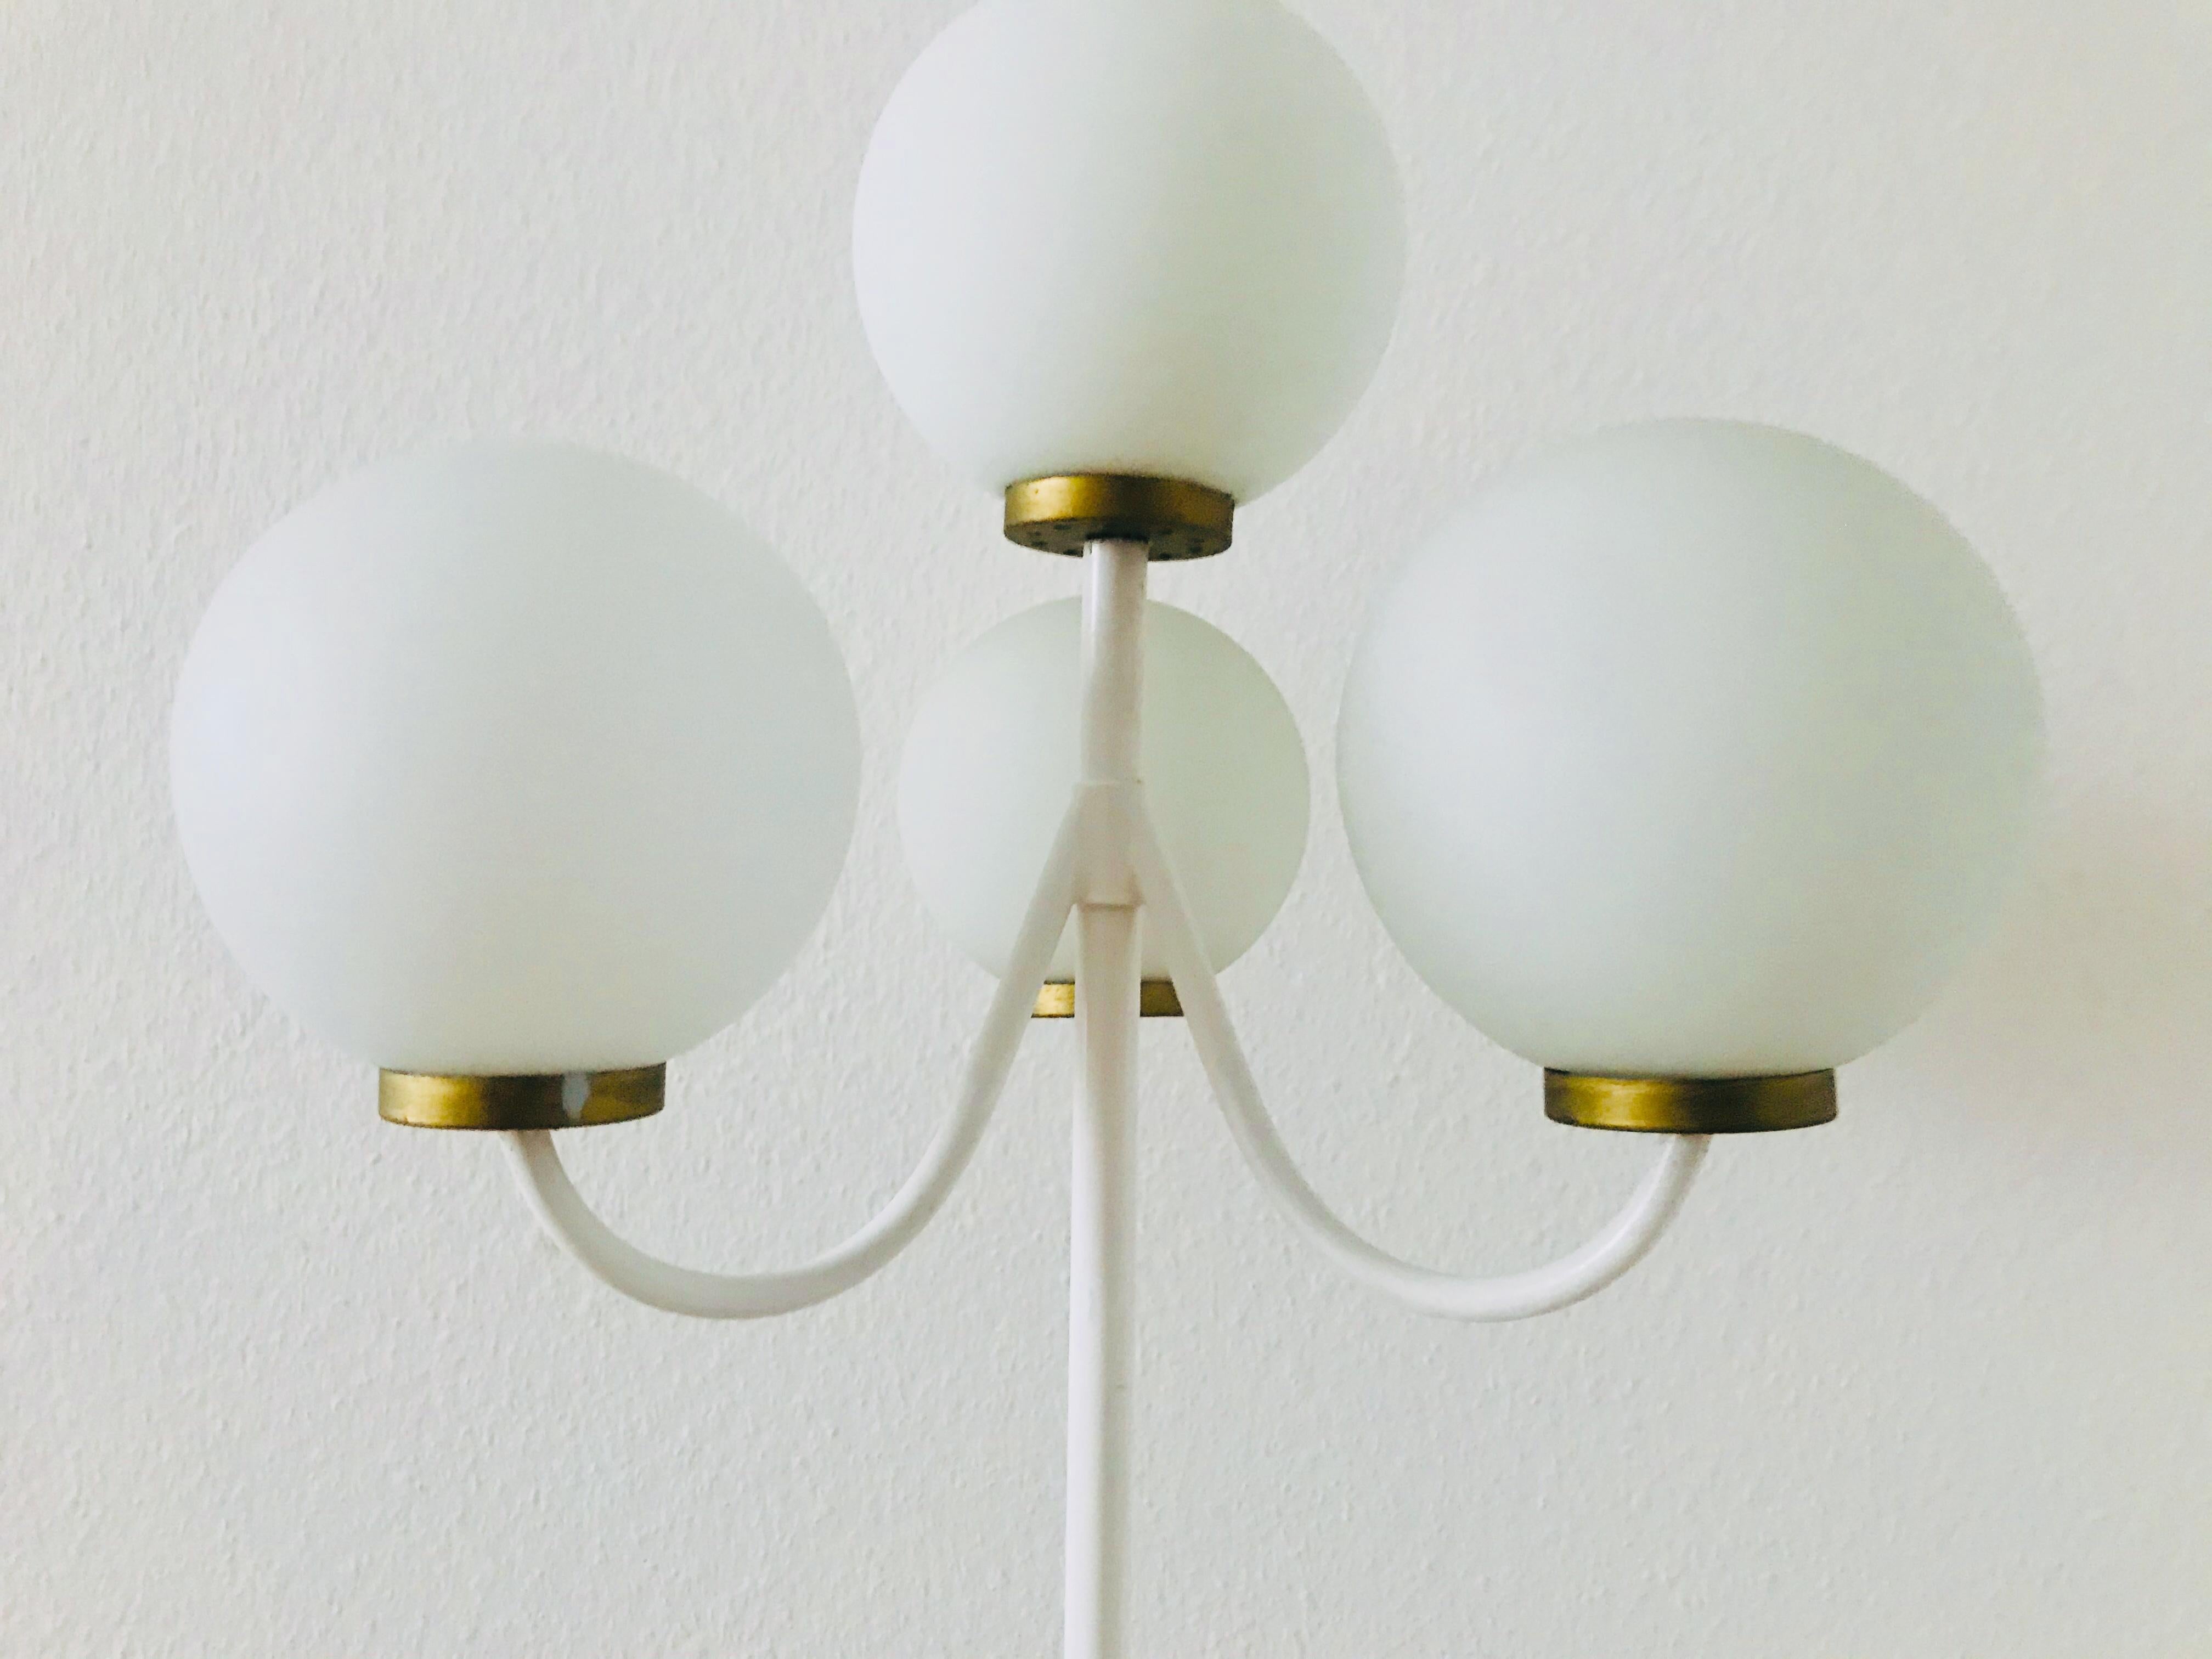 Kaiser Midcentury Brass and White 4-Arm Space Age Floor Lamp, 1960s, Germany For Sale 1